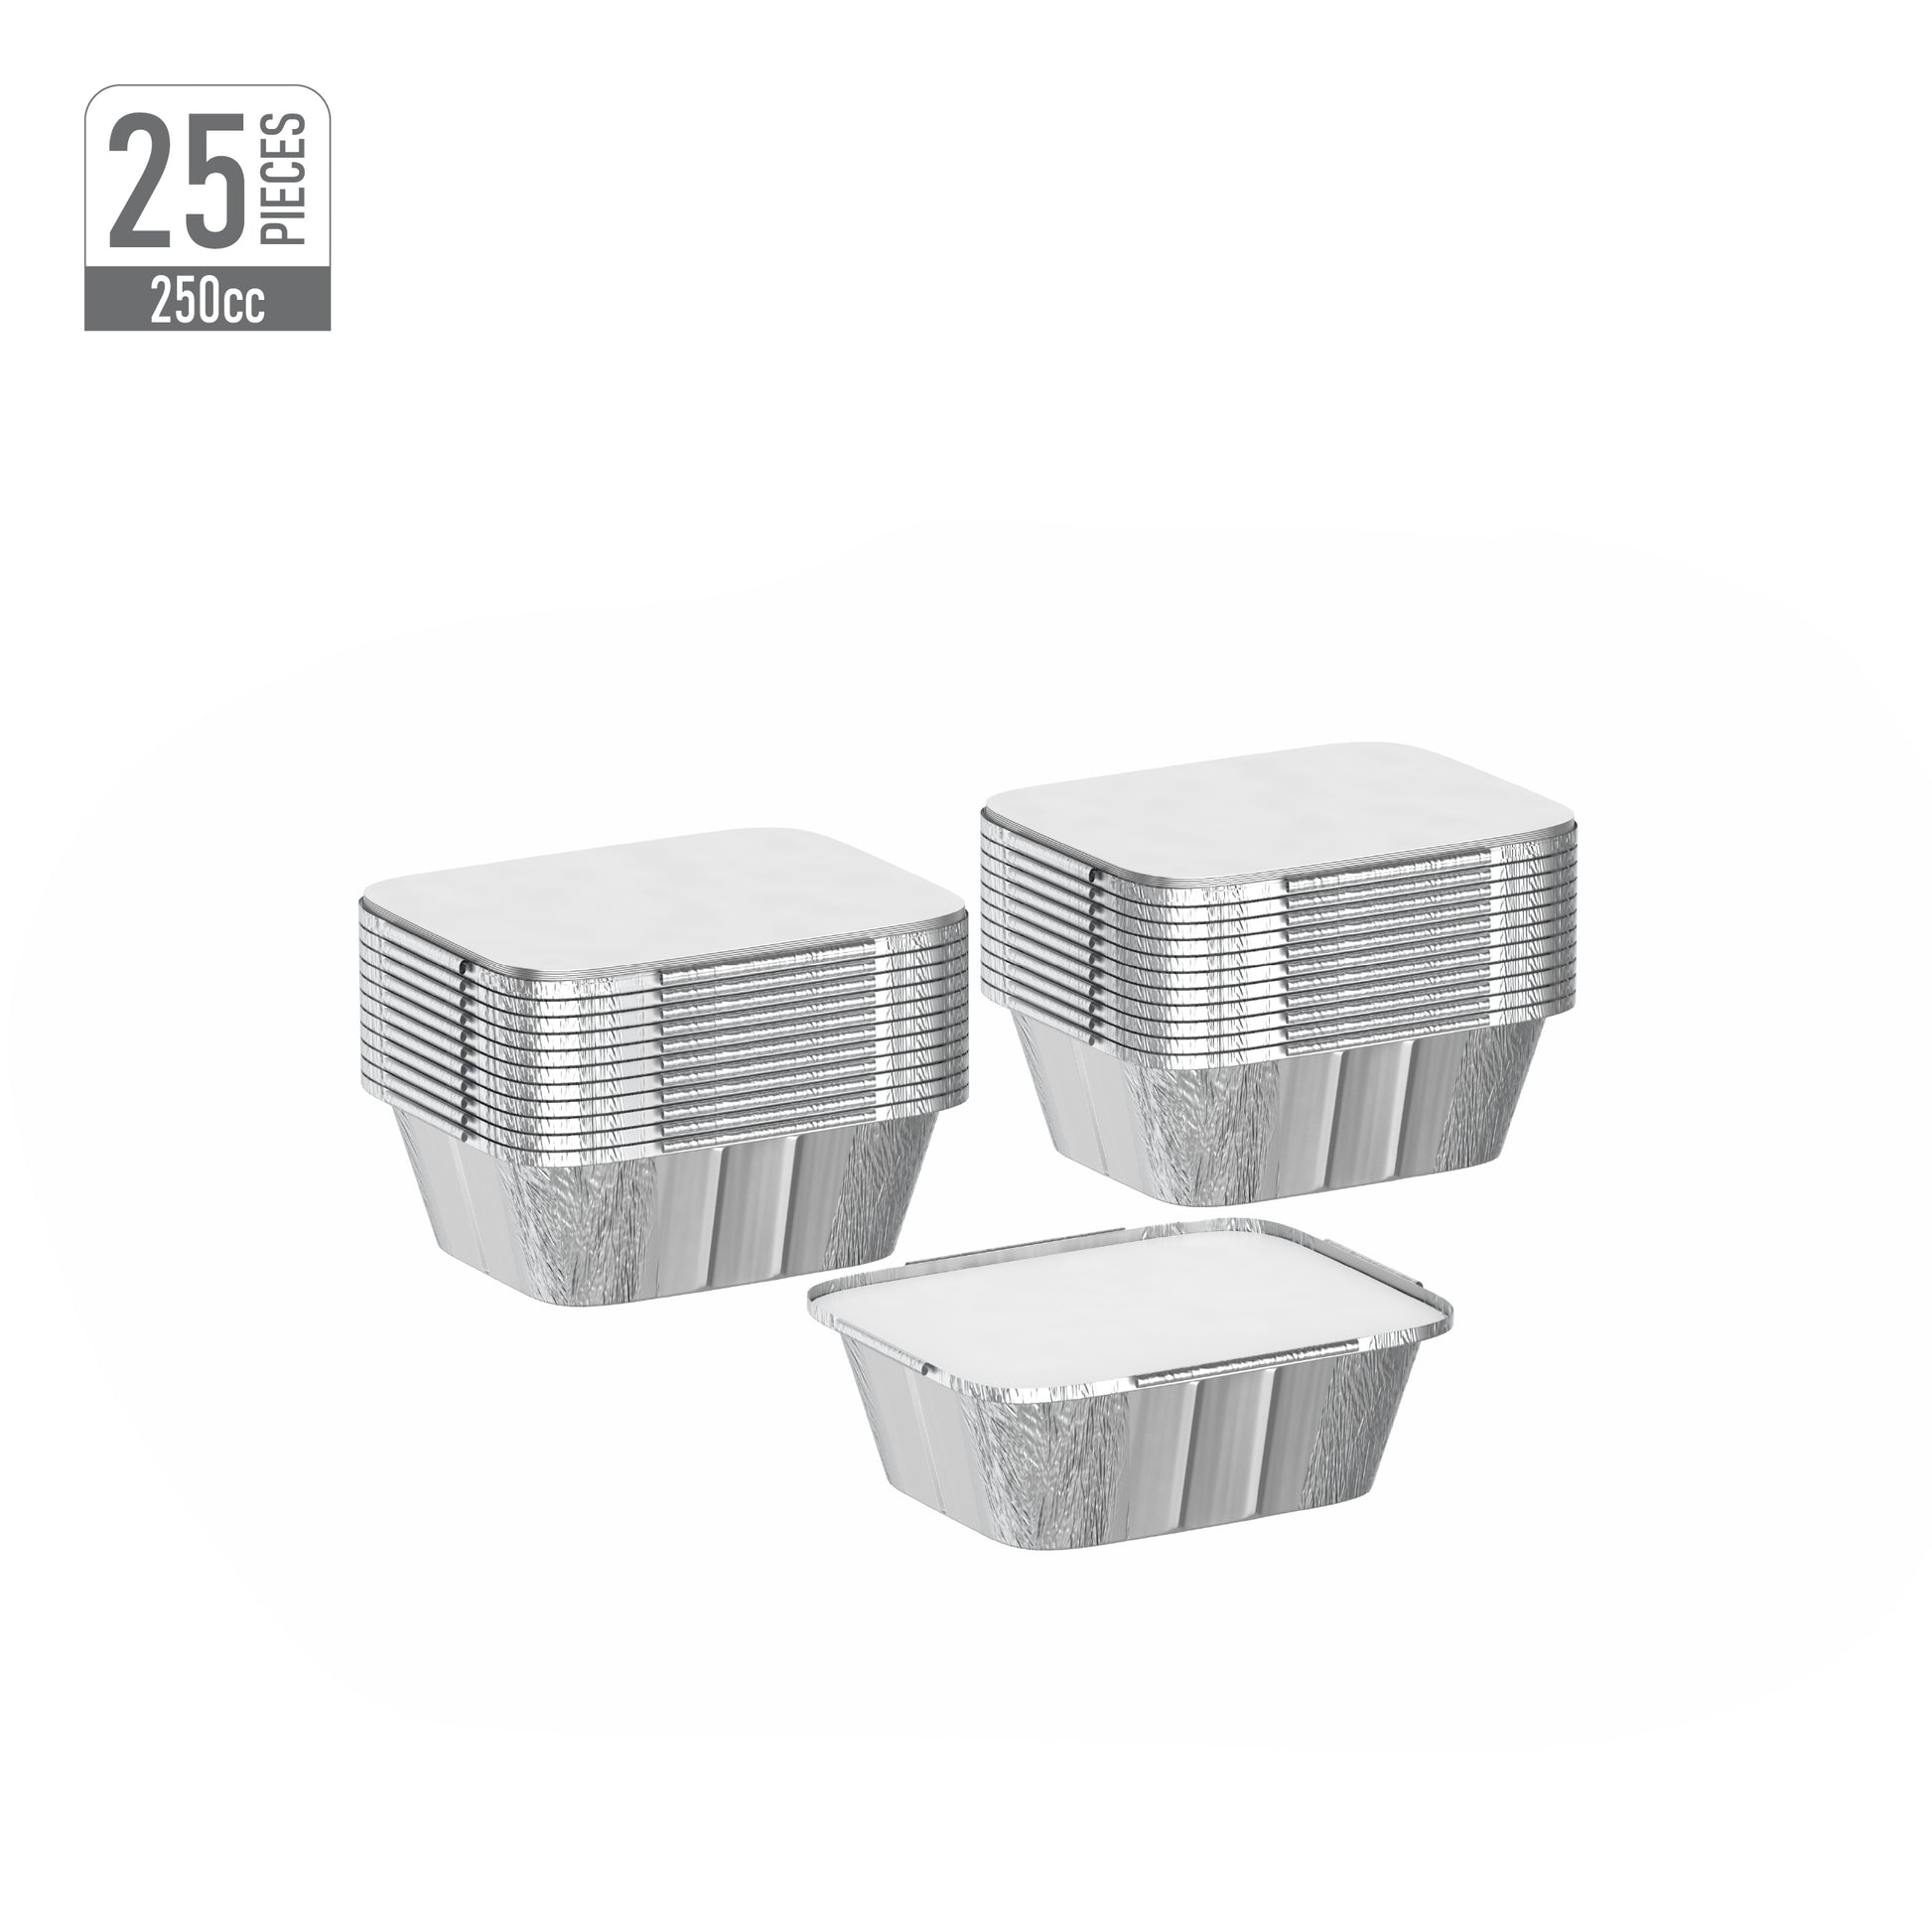 250 cc Pack of 25 Aluminium Containers with Lids